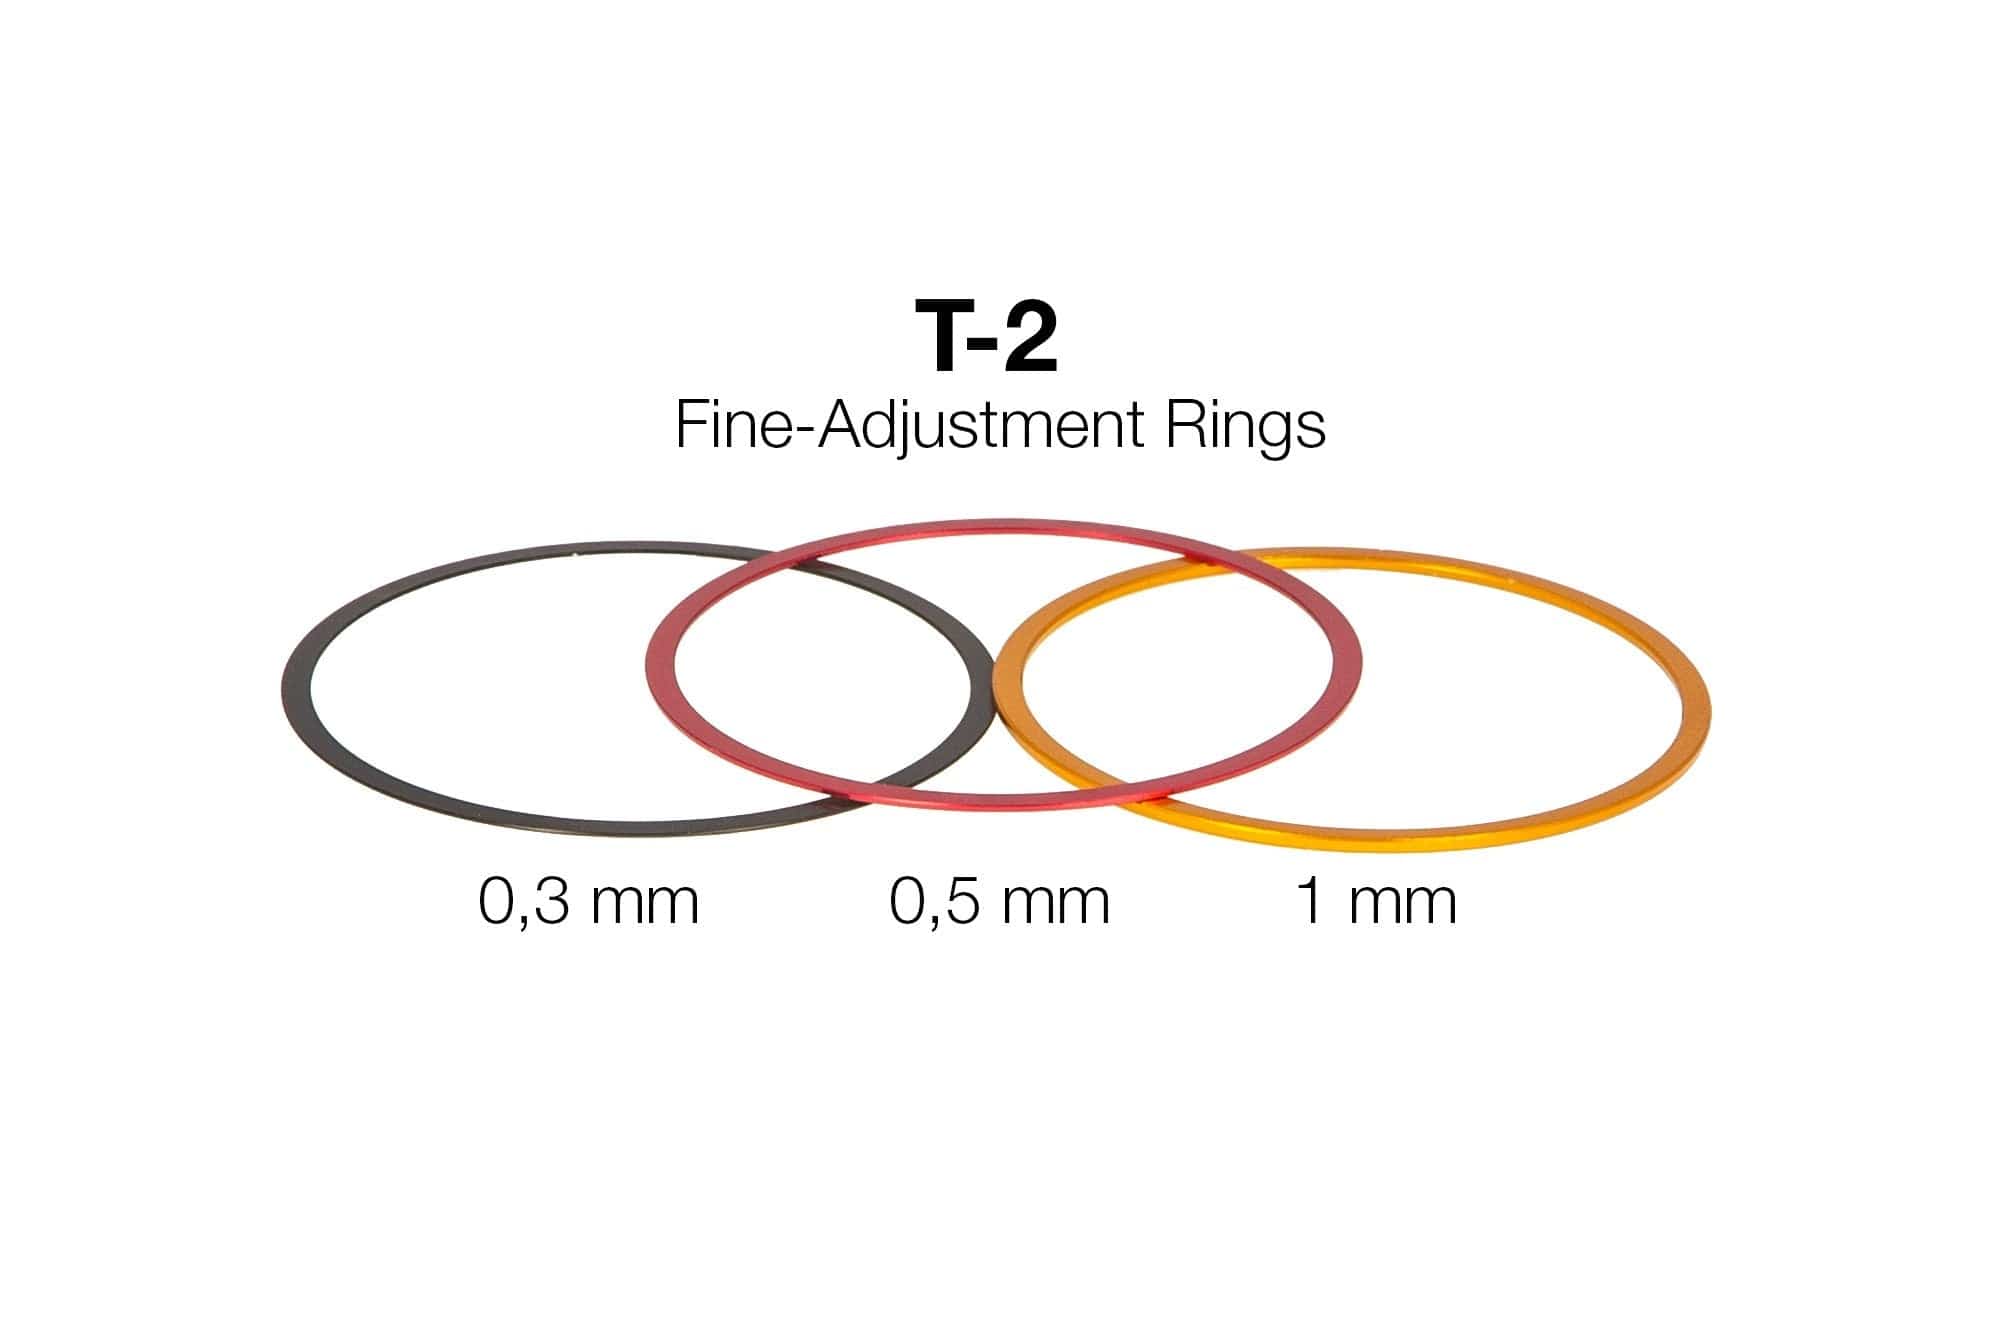 Baader Planetarium Accessory Baader T-2 Fine-Adjustment-Ring-Set, consisting of 3 Precision T-2 Alu-Adjustment-Rings 0,3/0,5/1mm - 2457910